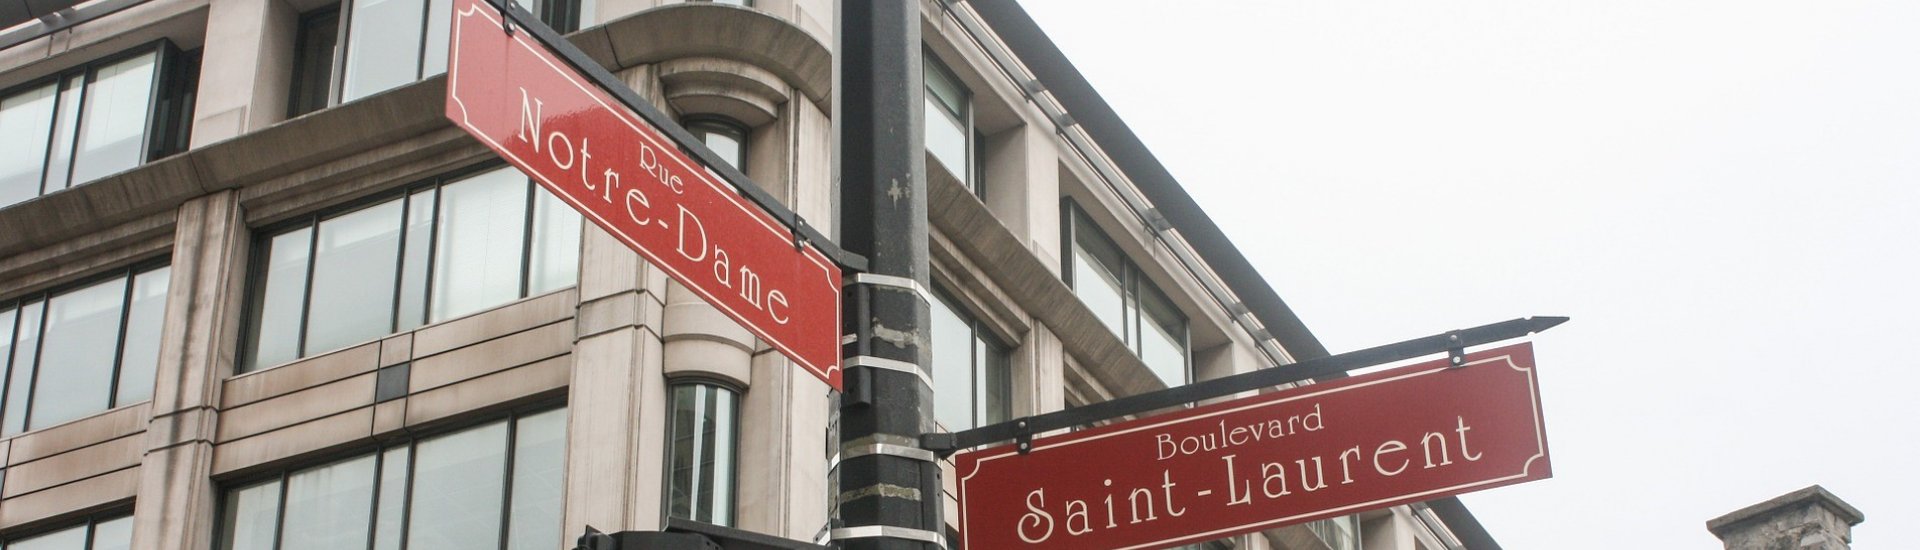 Montreal Street Sign